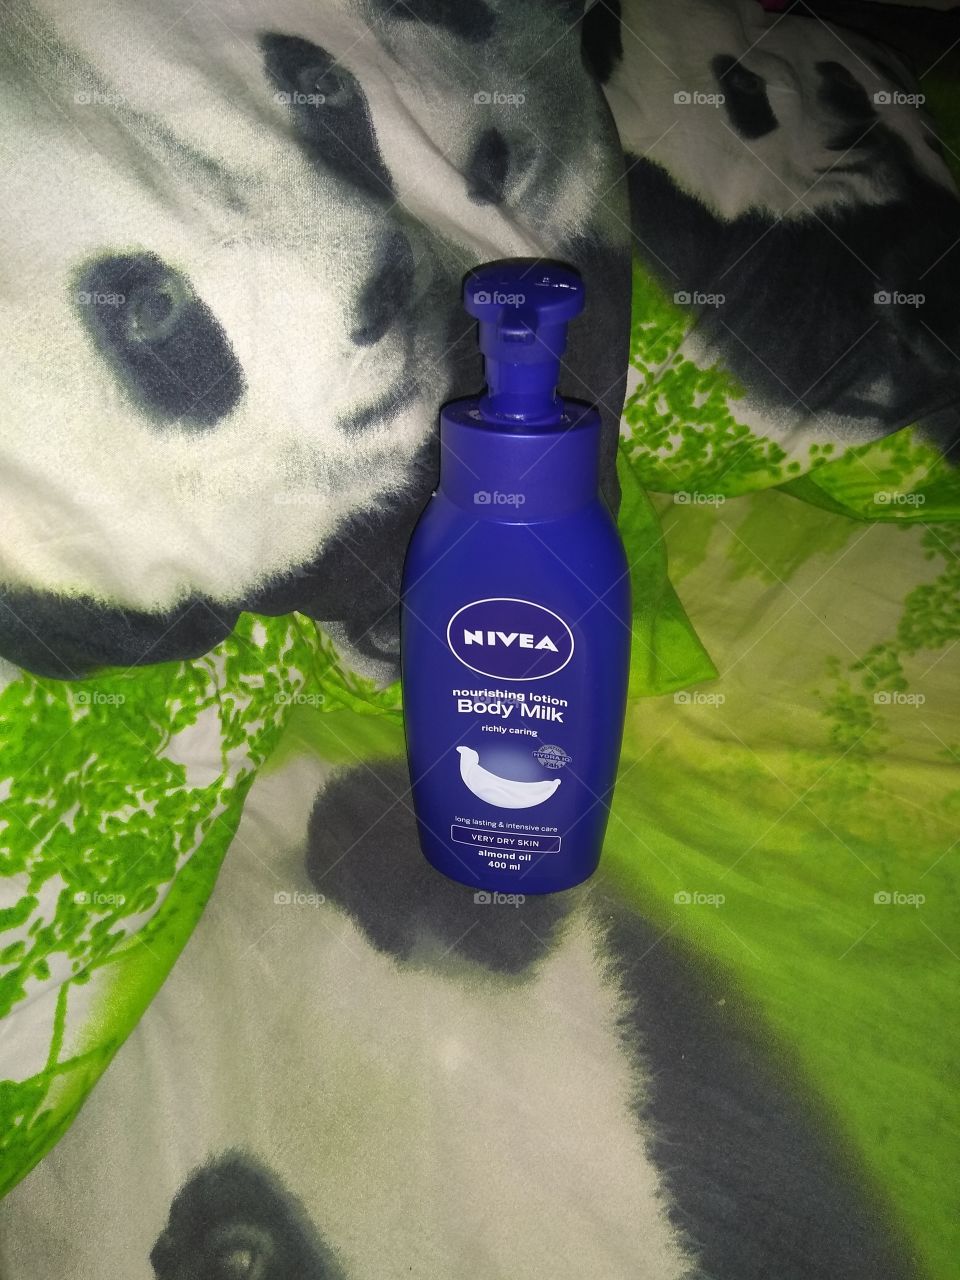 This Product is Awesome, it's Nourishes my Body for 12 Hours, Thanks Nivea